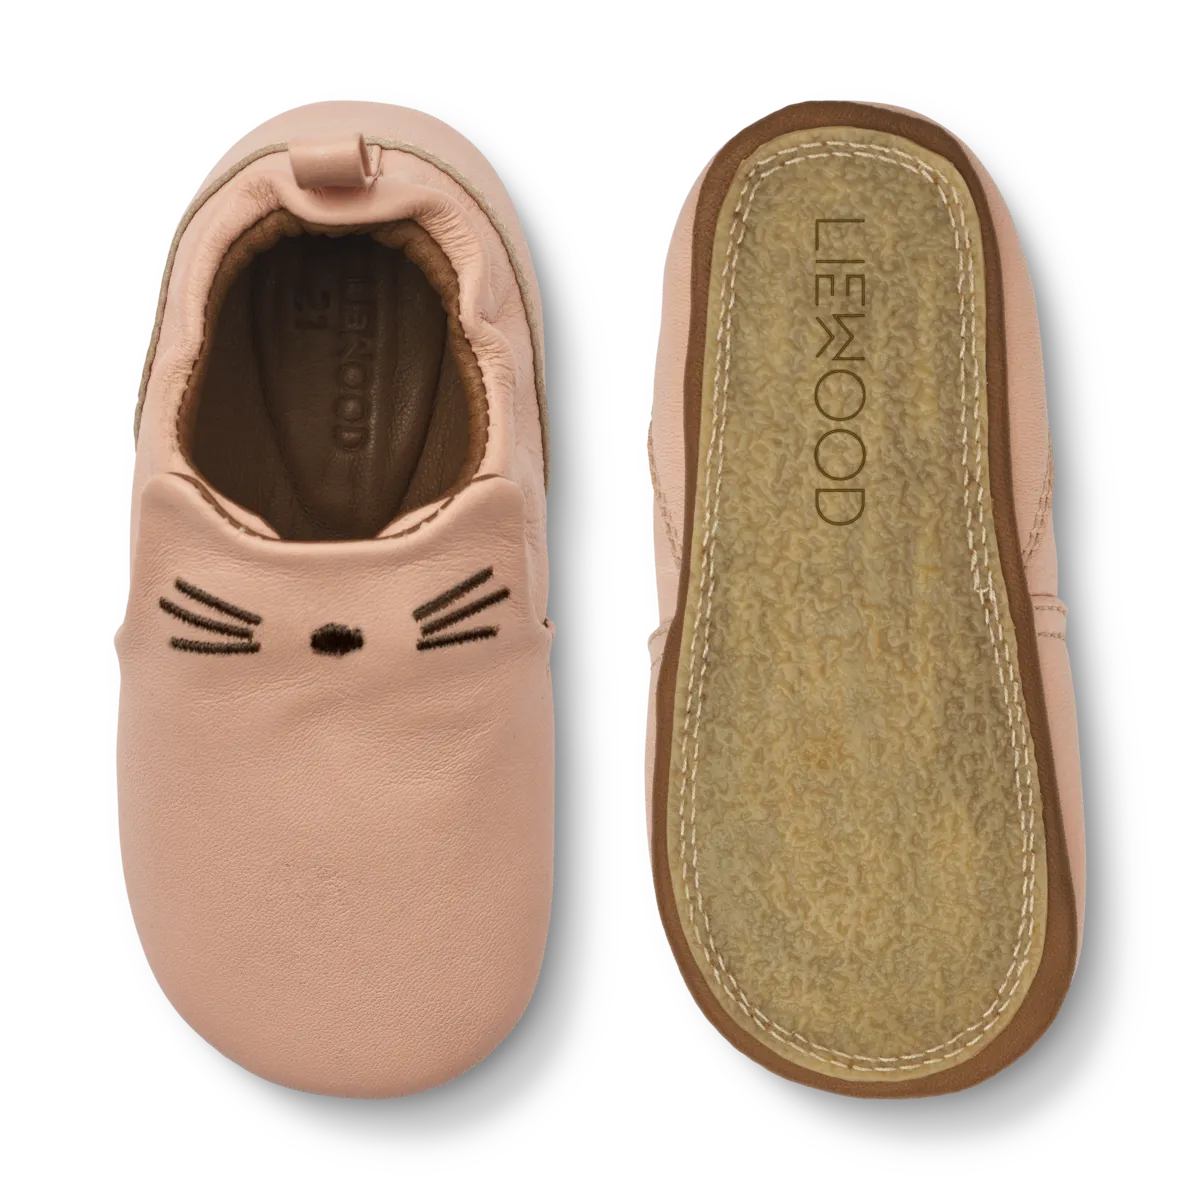 Eliot Cat Leather Slippers